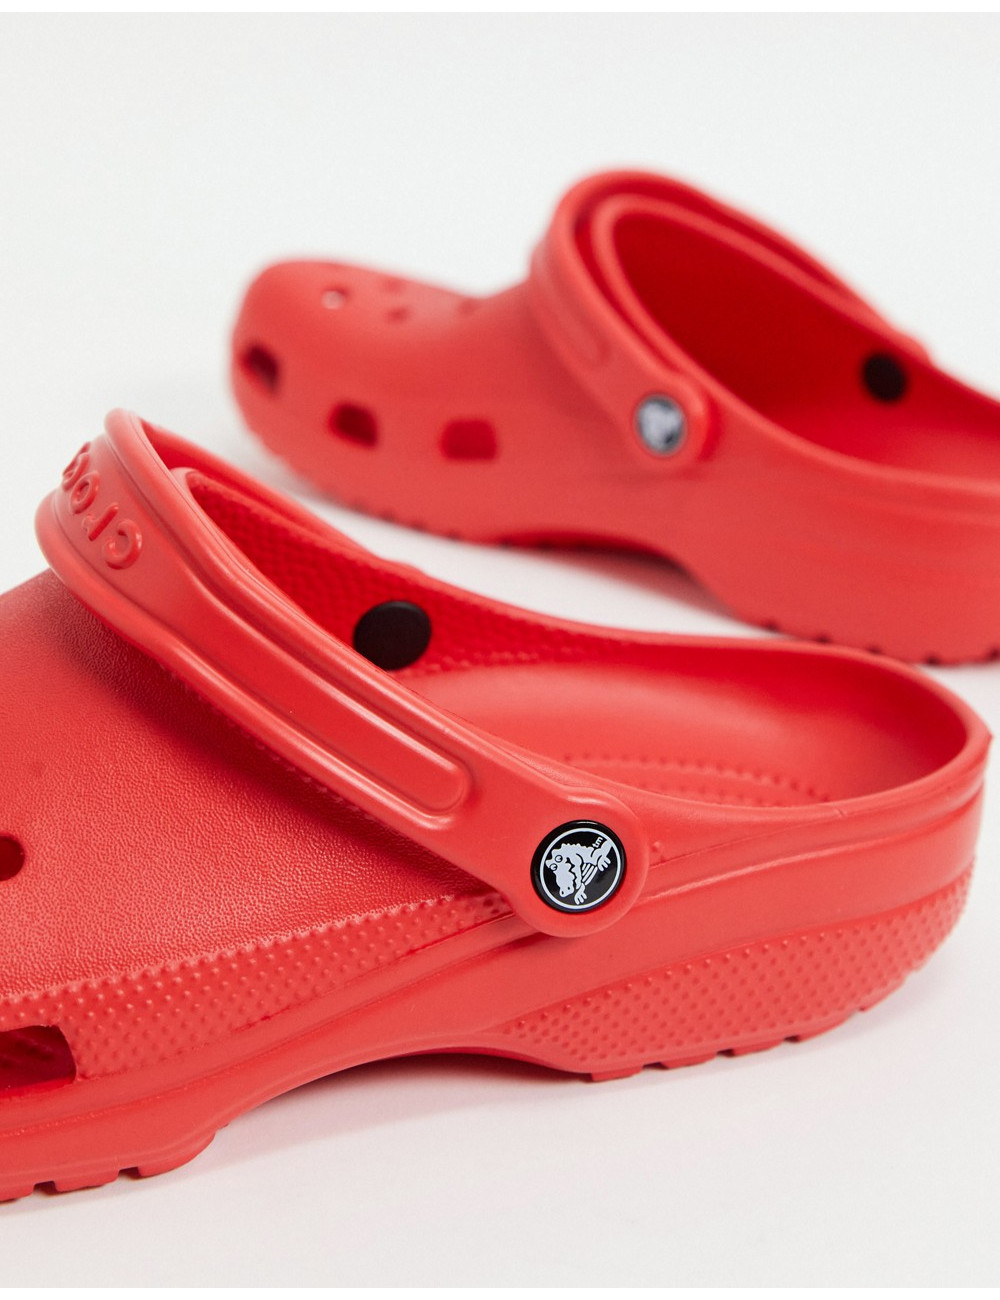 Crocs classic shoes in red